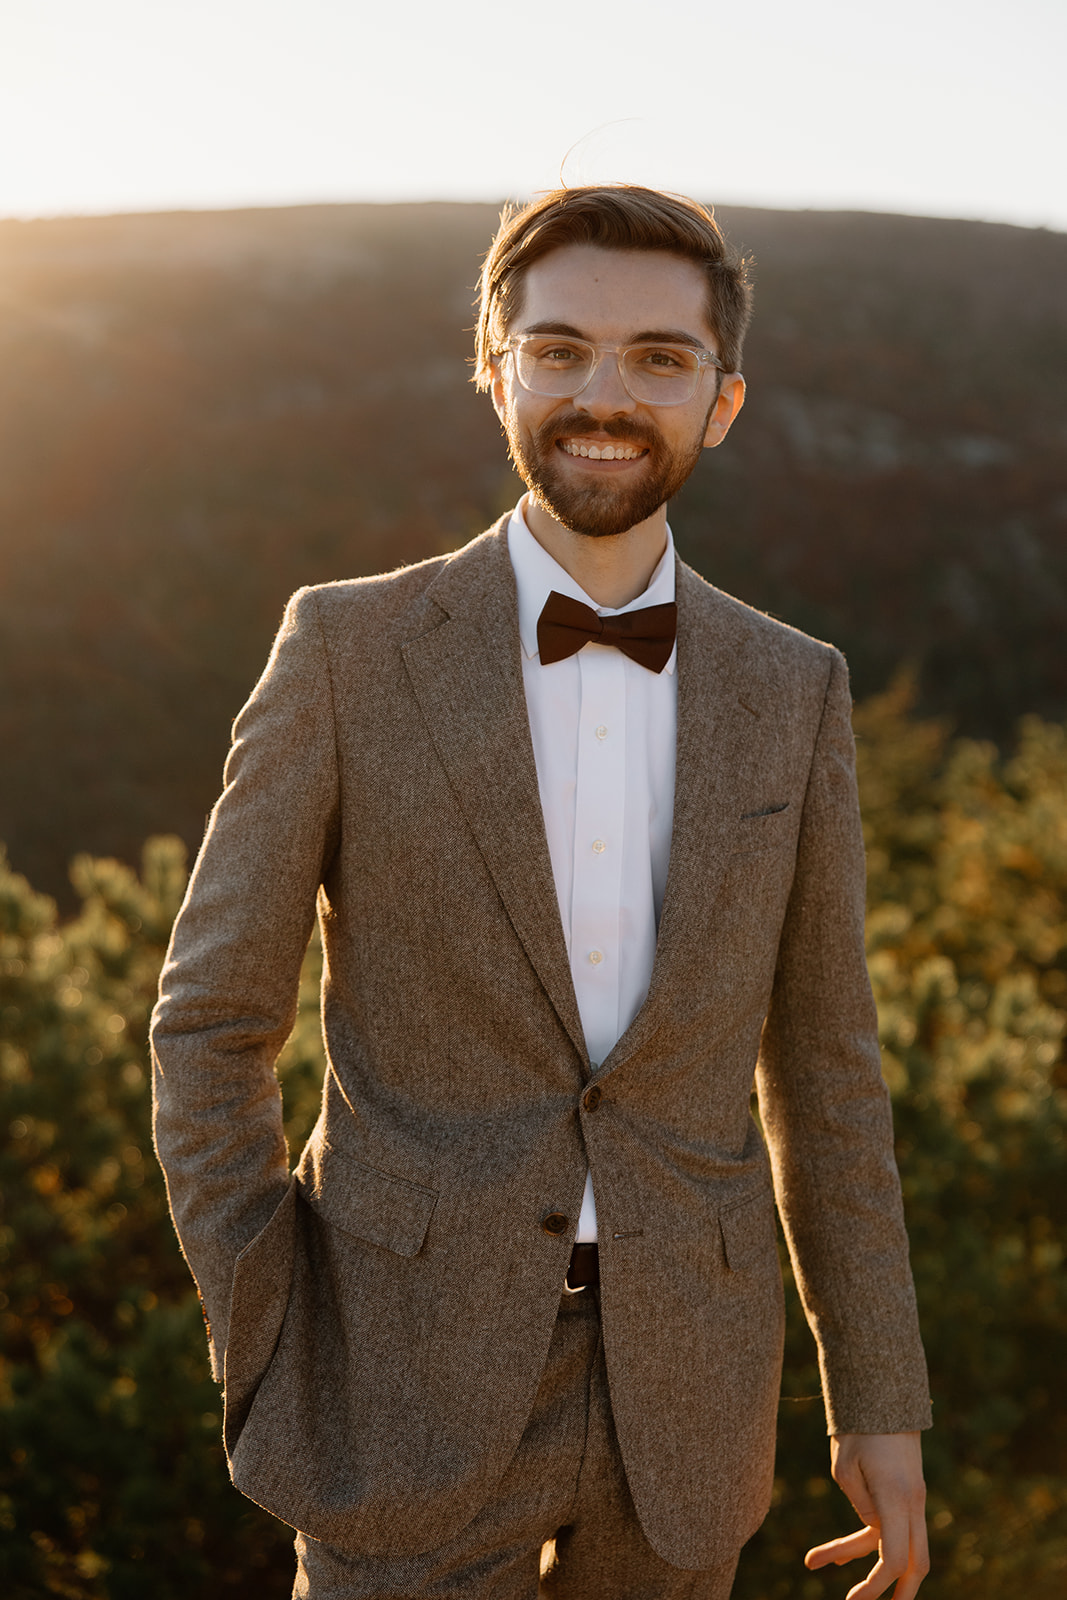 Bubble rock elopement and vows in the Fall. Acadia national park elopement and microwedding. Groom 
portrait.